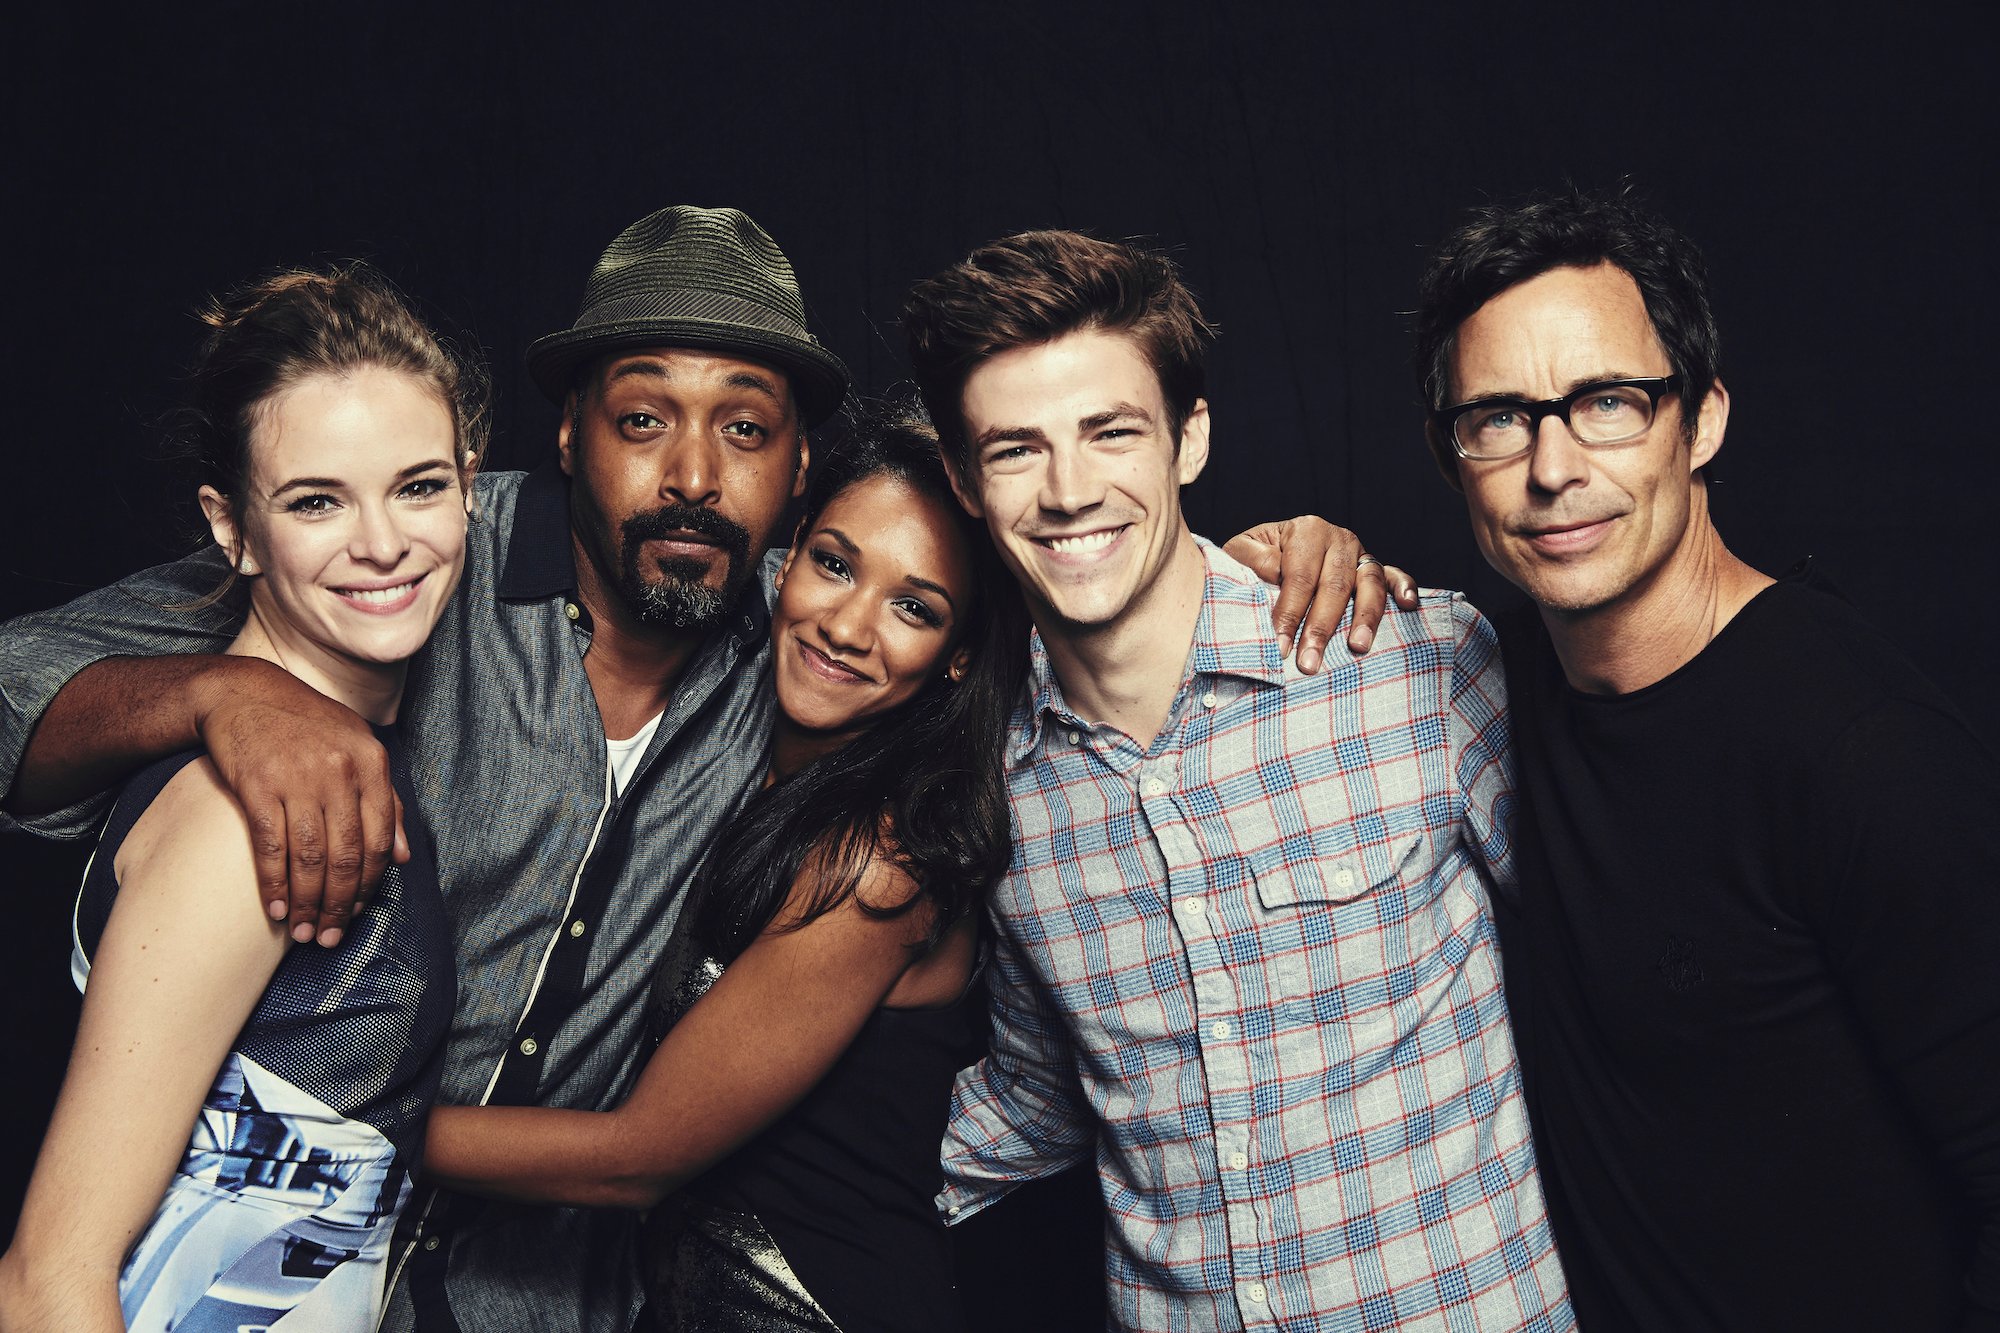 Cast members of 'The Flash' smiling in front of a black curtain